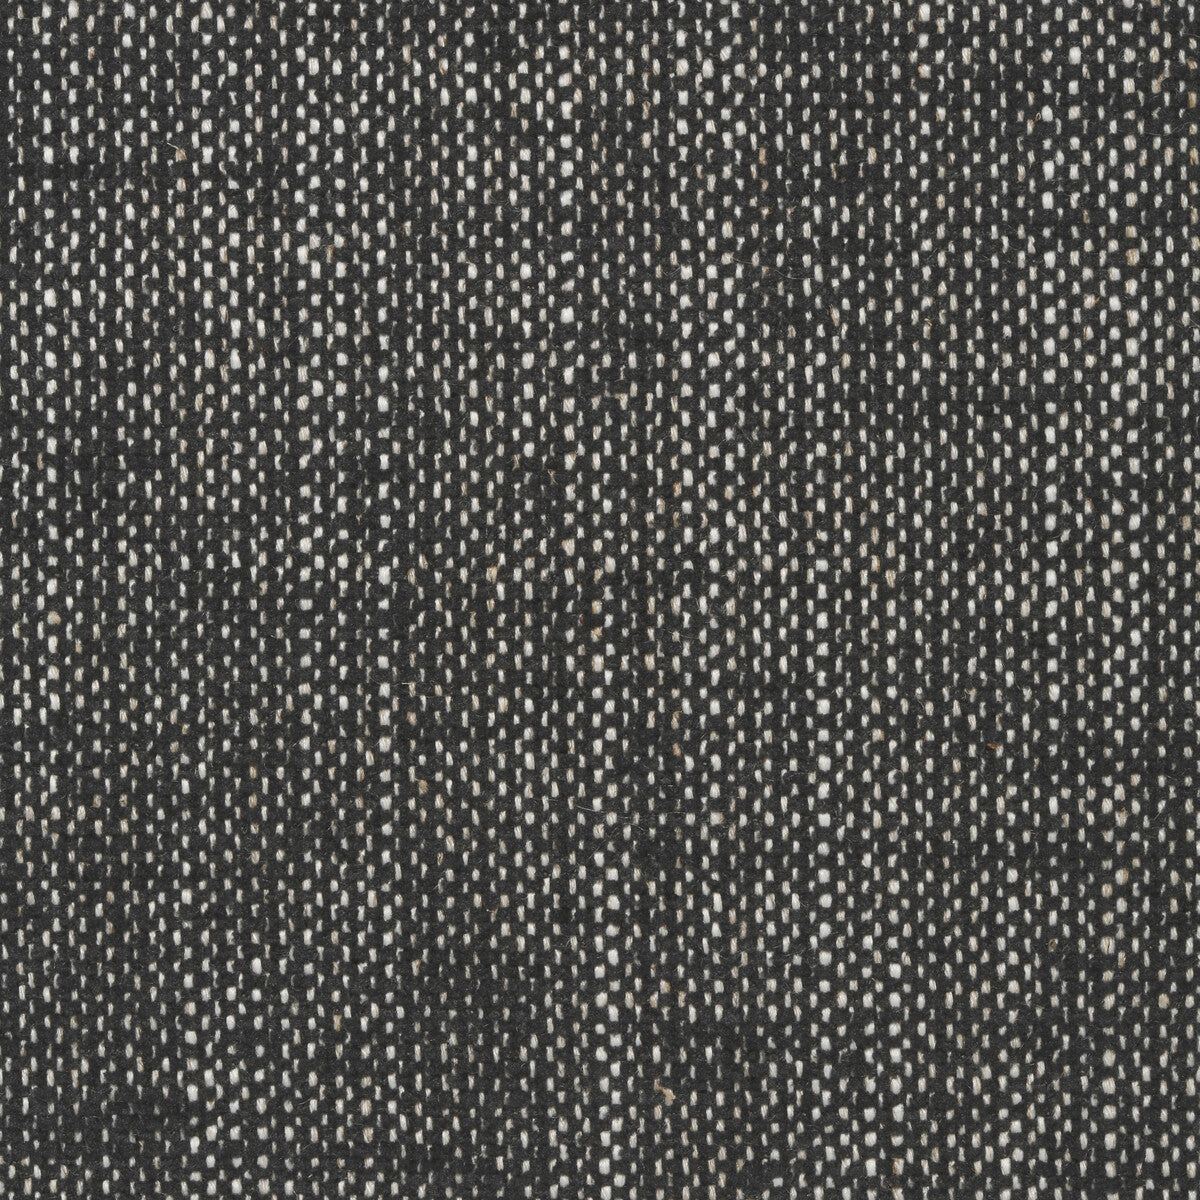 Kravet Smart fabric in 35111-81 color - pattern 35111.81.0 - by Kravet Smart in the Performance Crypton Home collection